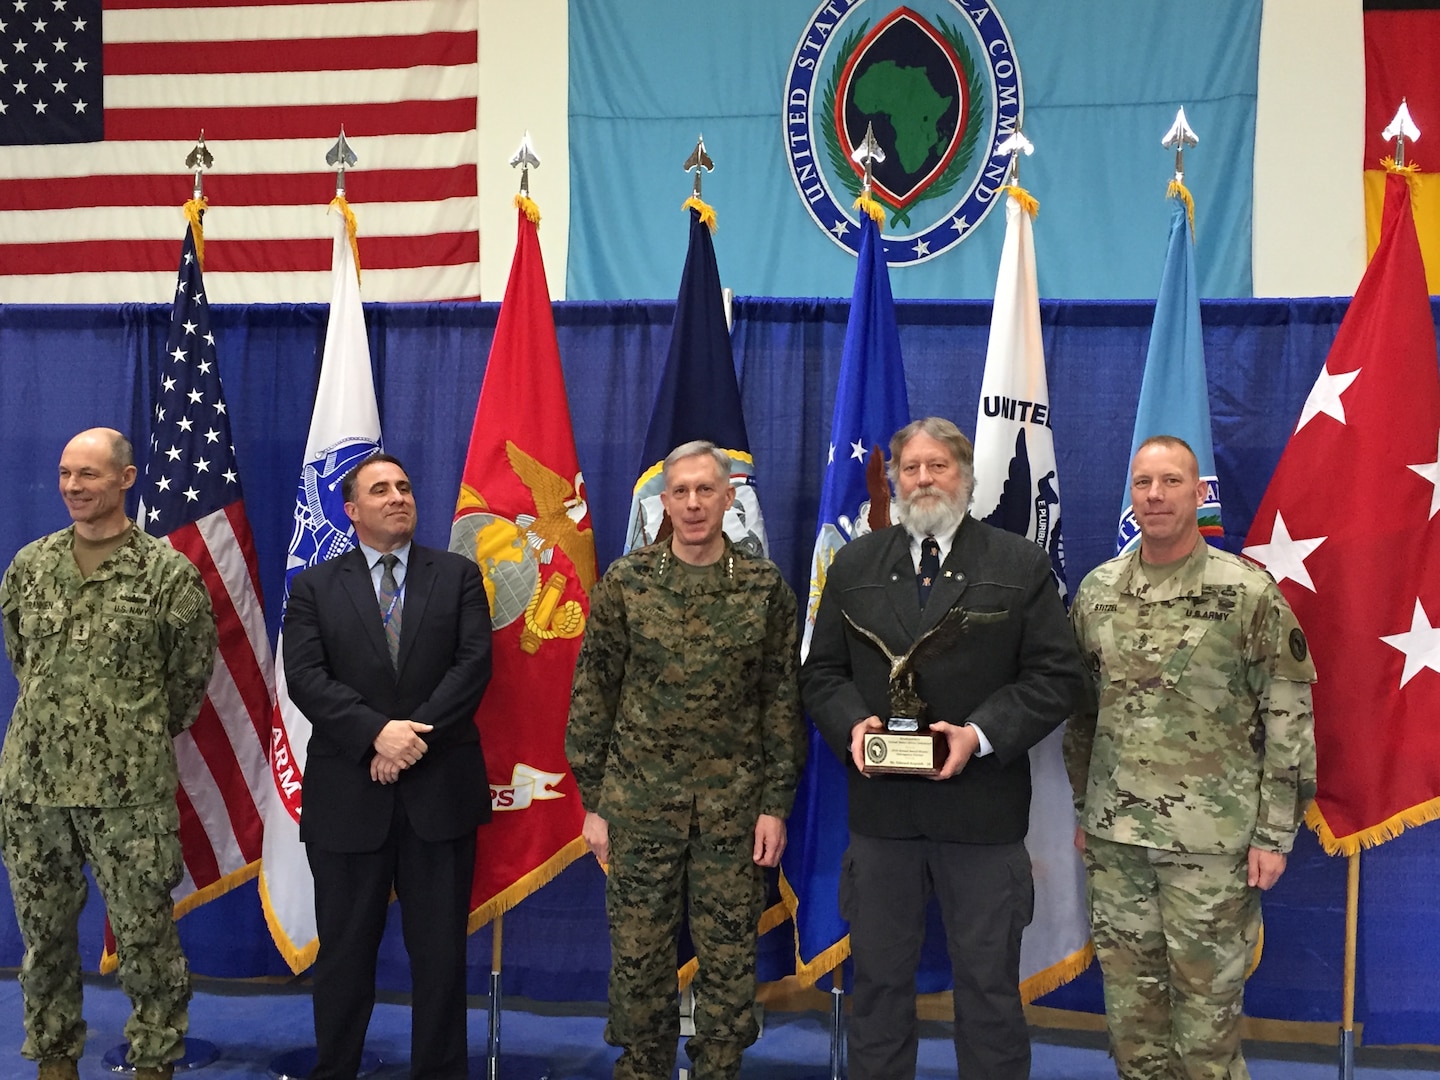 Edward Kopsick, logistics management specialist with Defense Logistics Agency Distribution, receives the United States Africa Command Interagency Partner of the Year award for his work in supporting distribution operations in the area of responsibility.